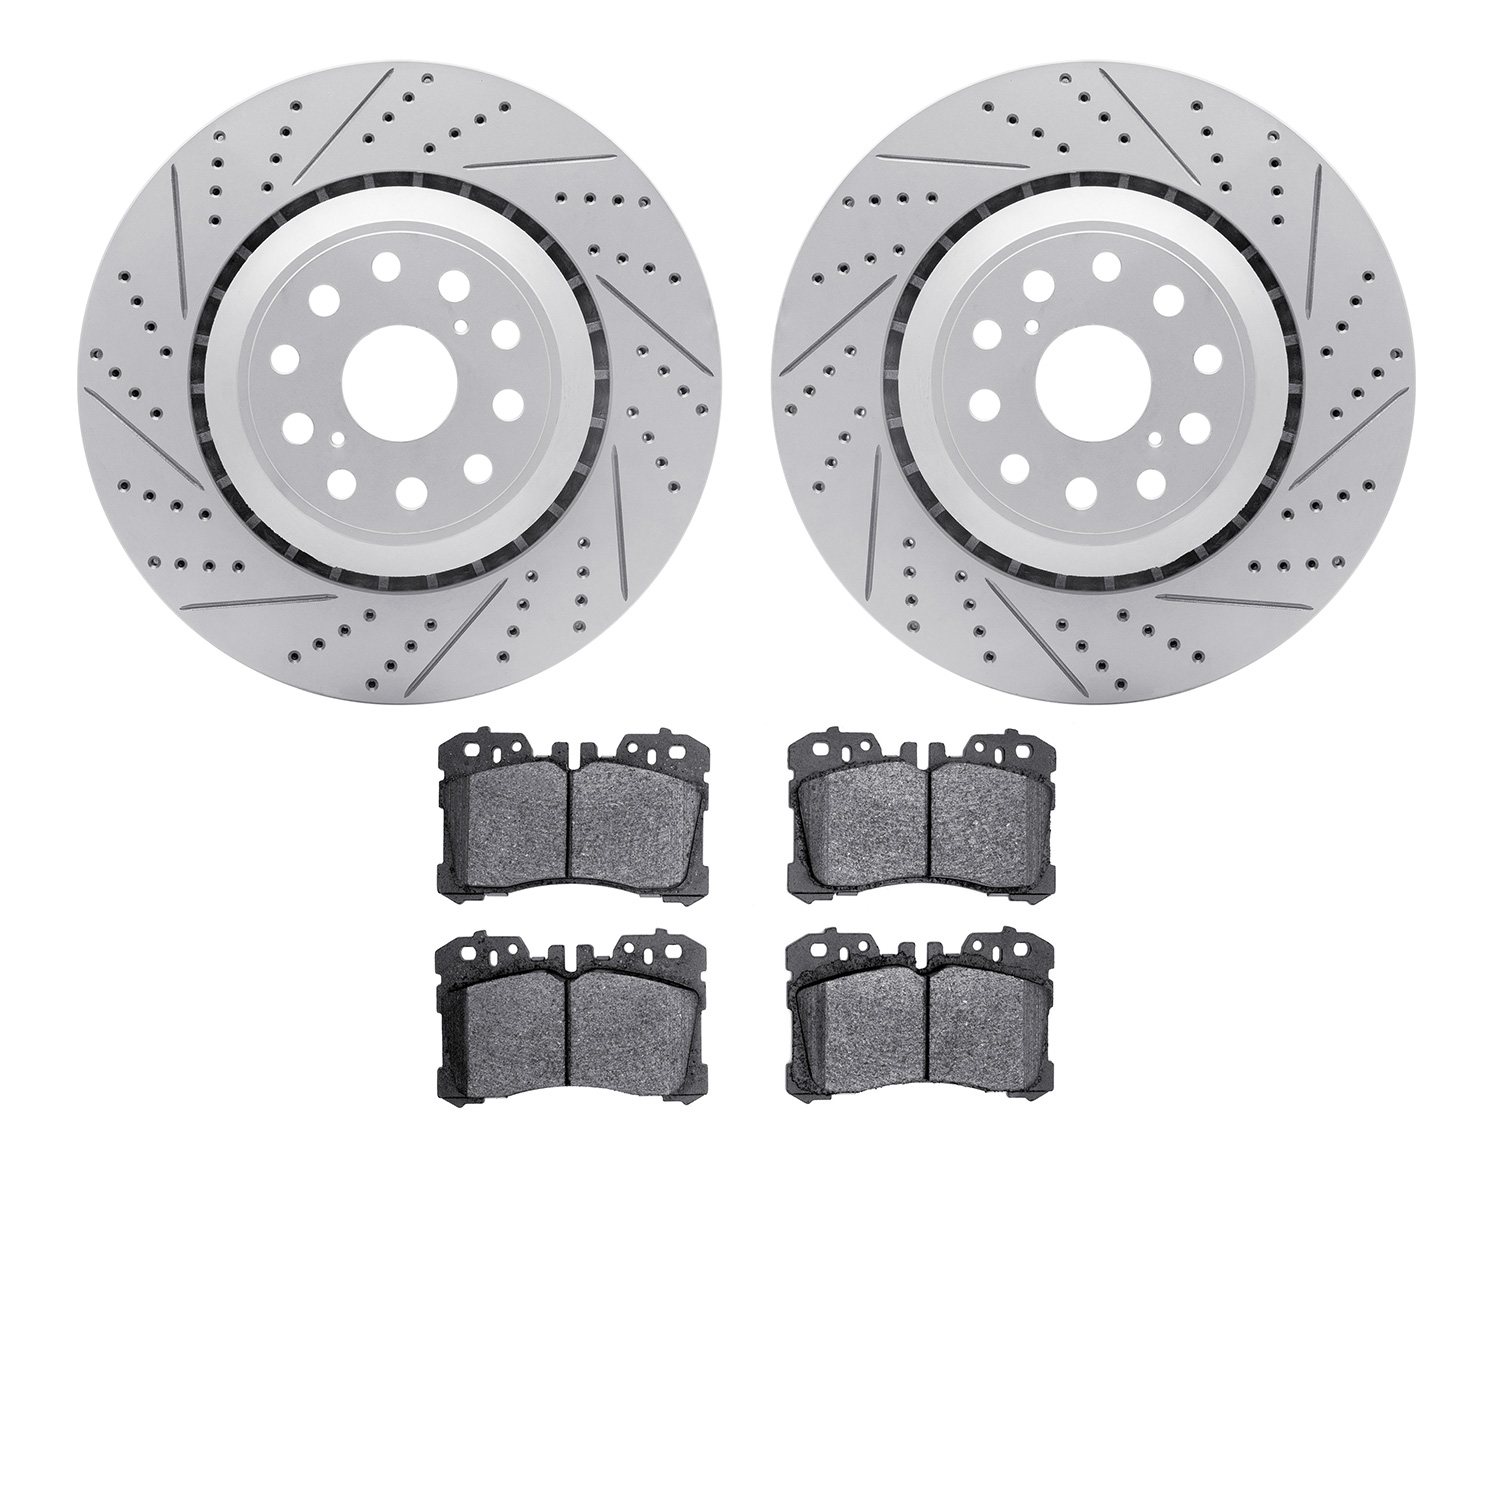 2502-75015 Geoperformance Drilled/Slotted Rotors w/5000 Advanced Brake Pads Kit, 2007-2017 Lexus/Toyota/Scion, Position: Front